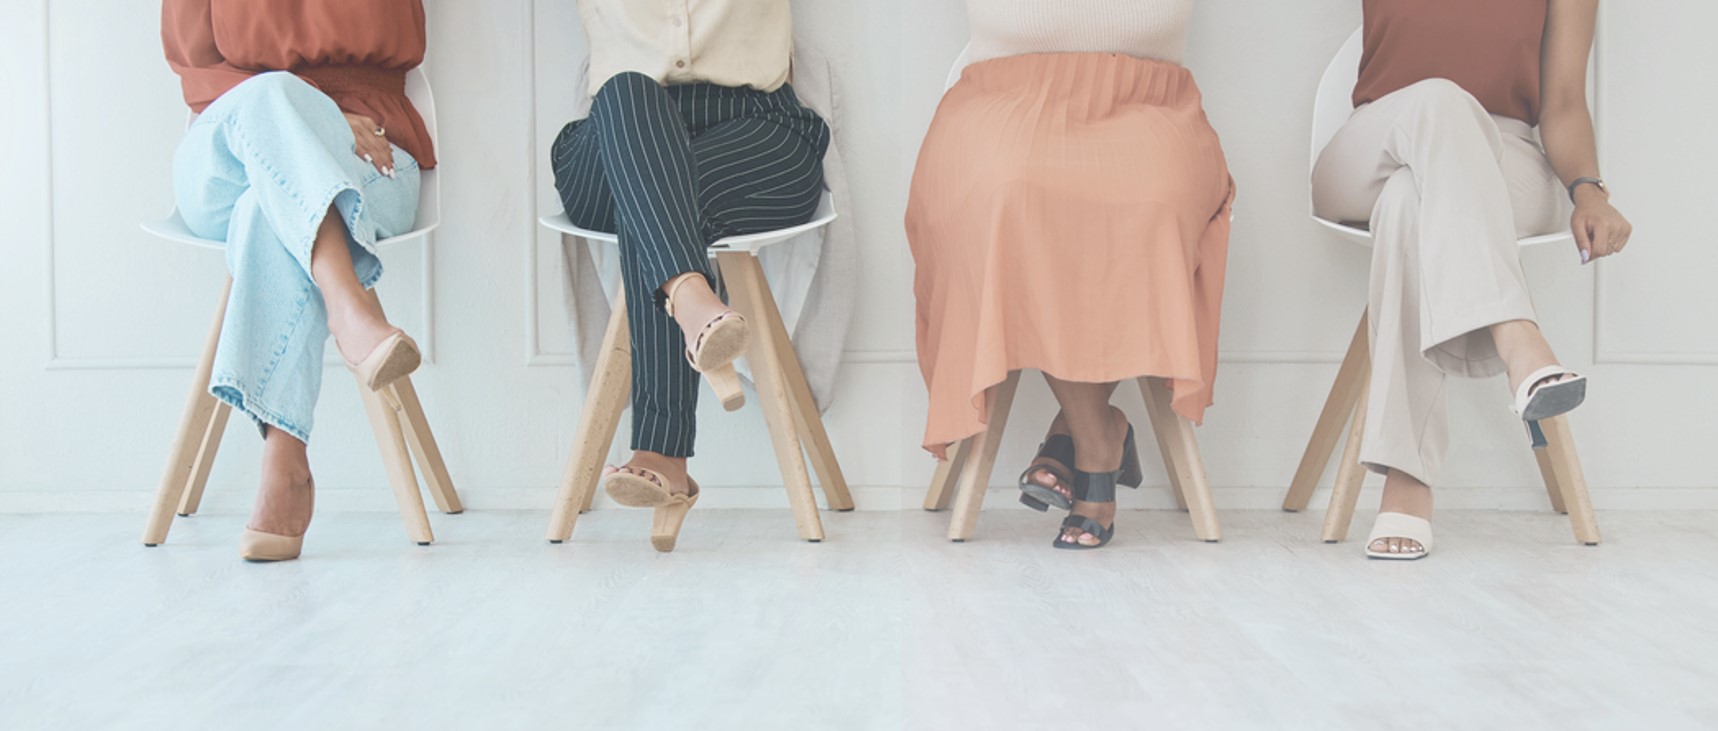 Women sitting on chairs with only their waist down showing